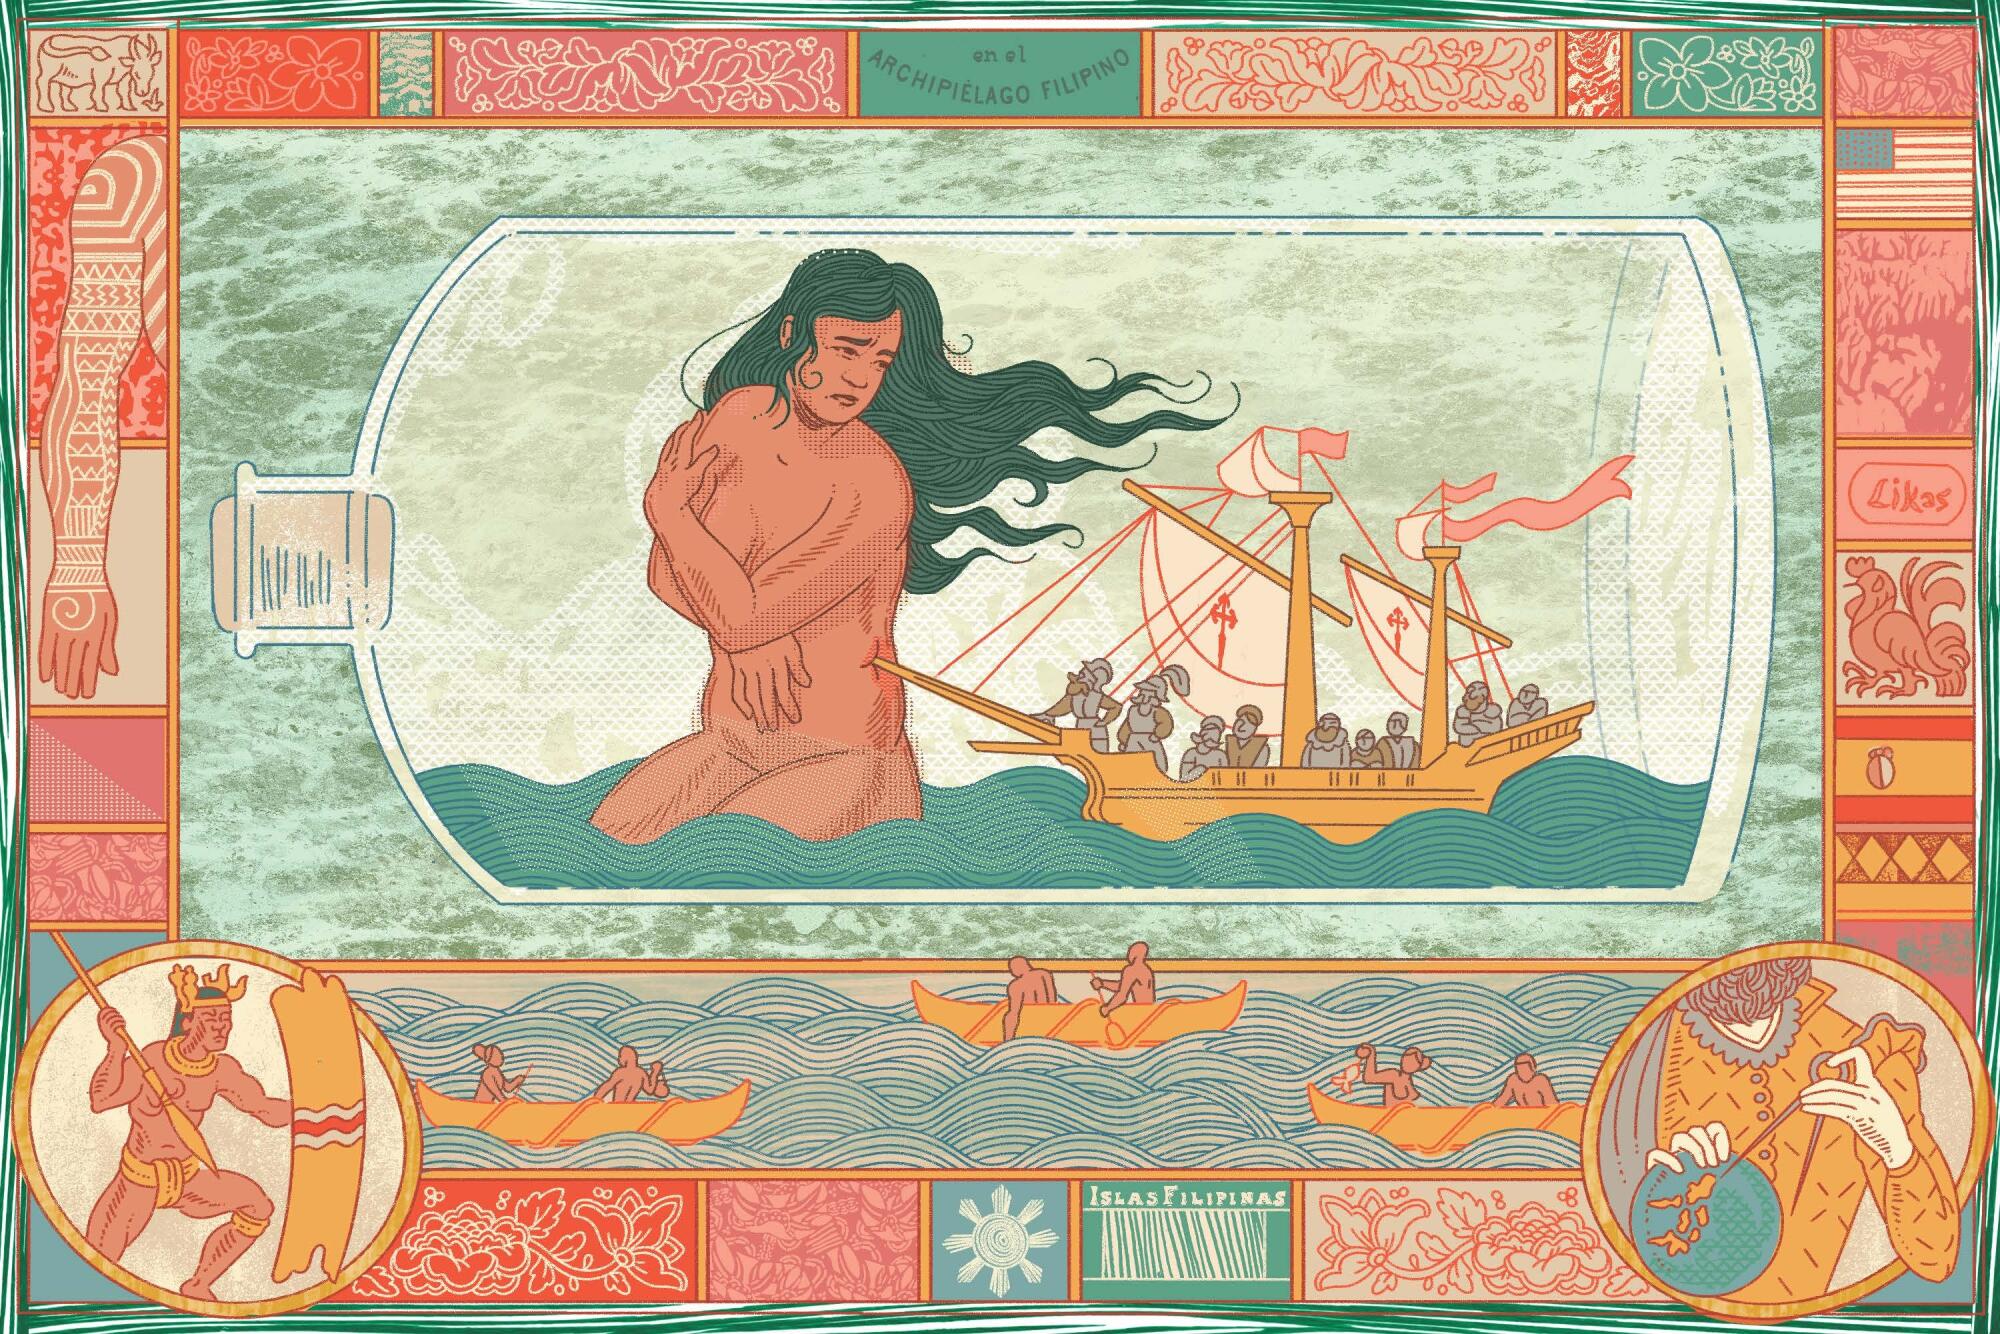 An illustration shows a Filipino woman being attacked by a ship of imperialists. 